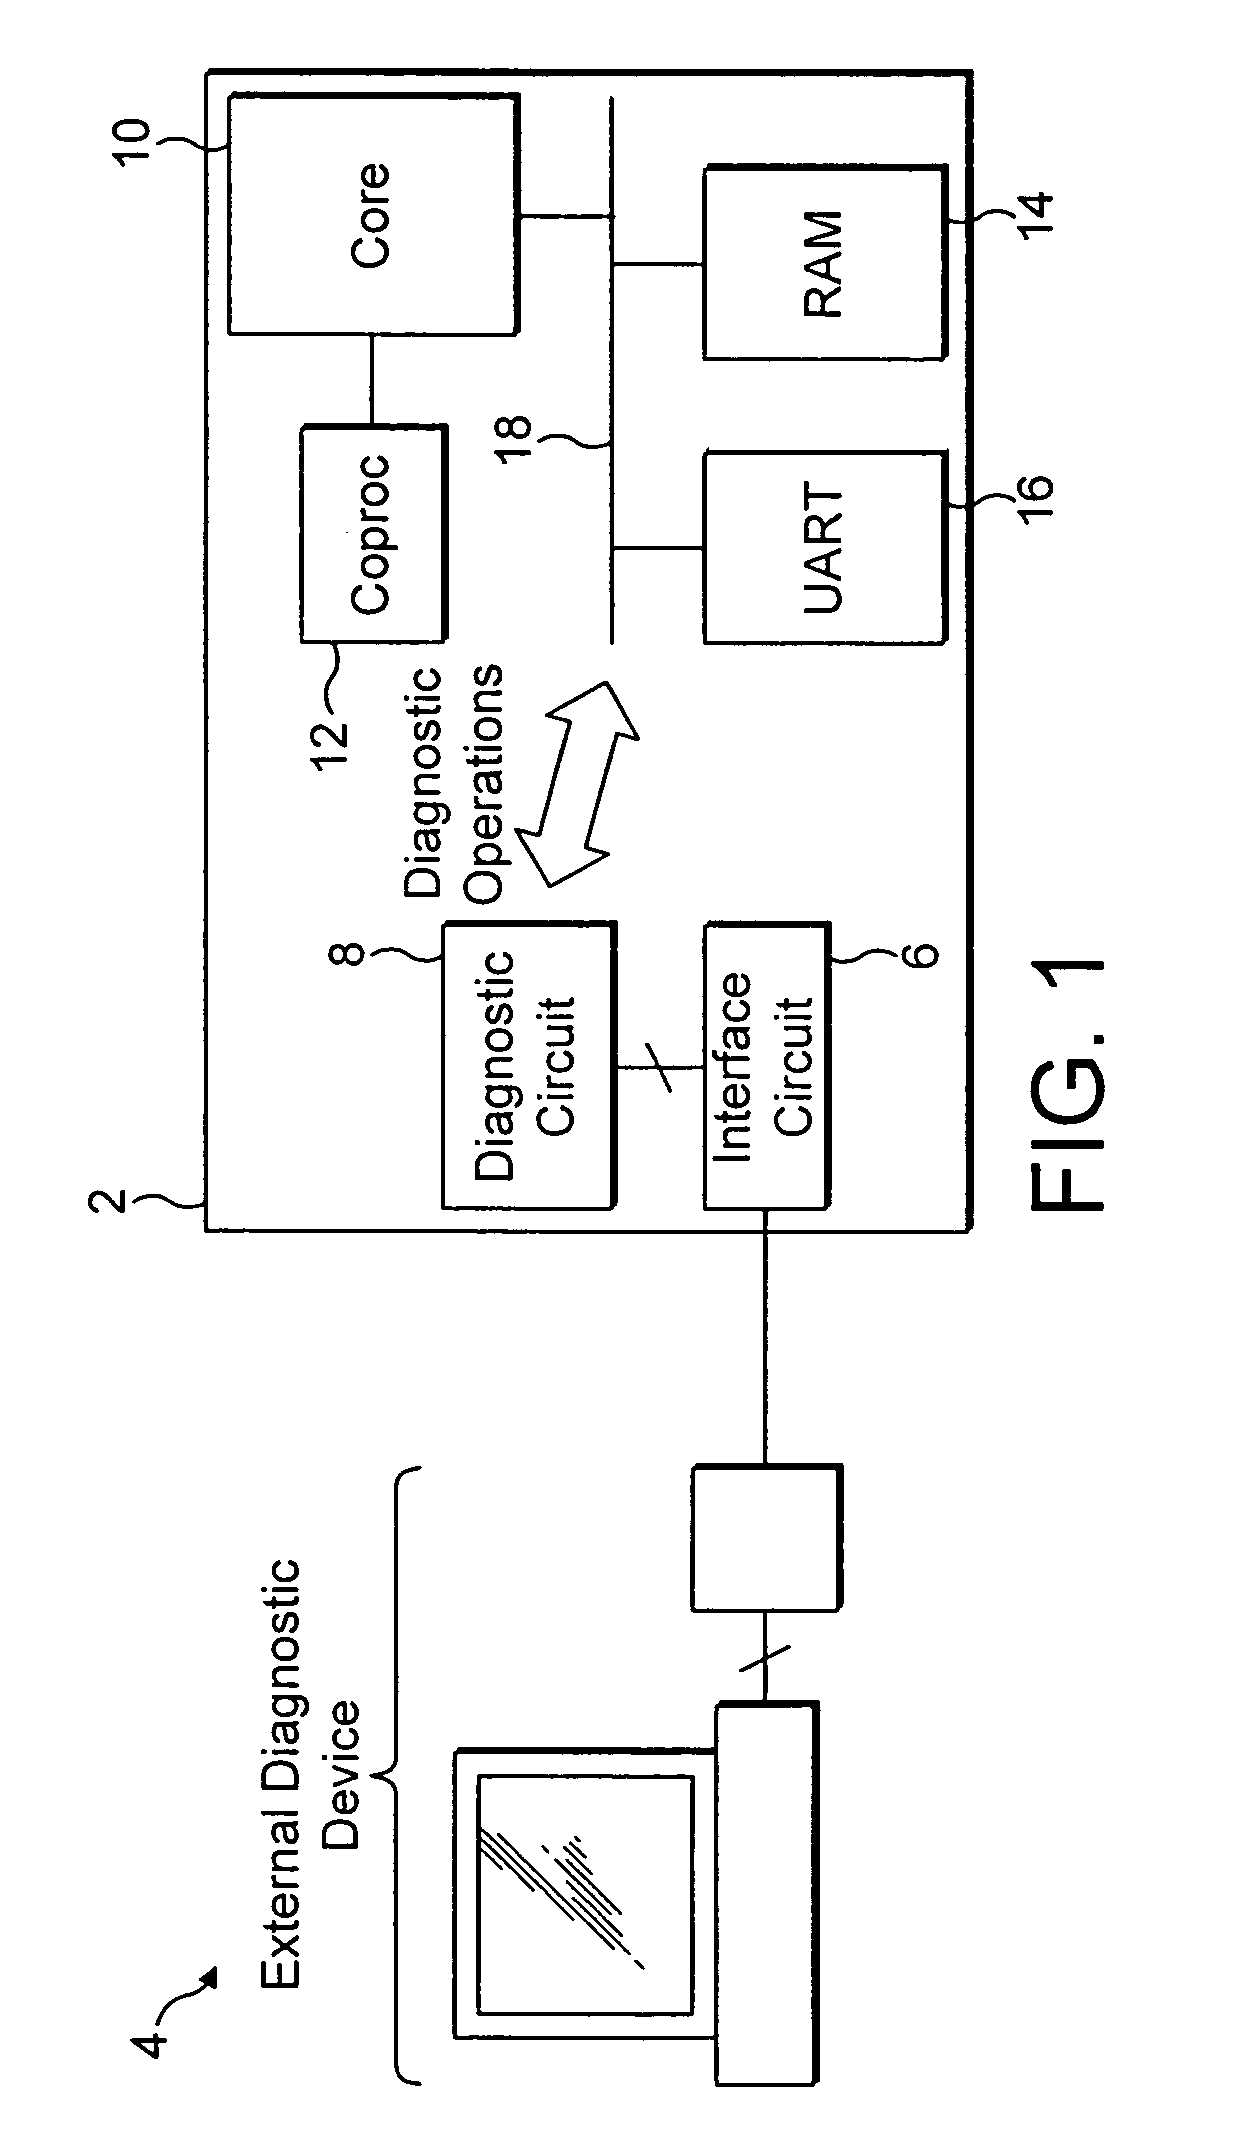 On-board diagnostic circuit for an integrated circuit